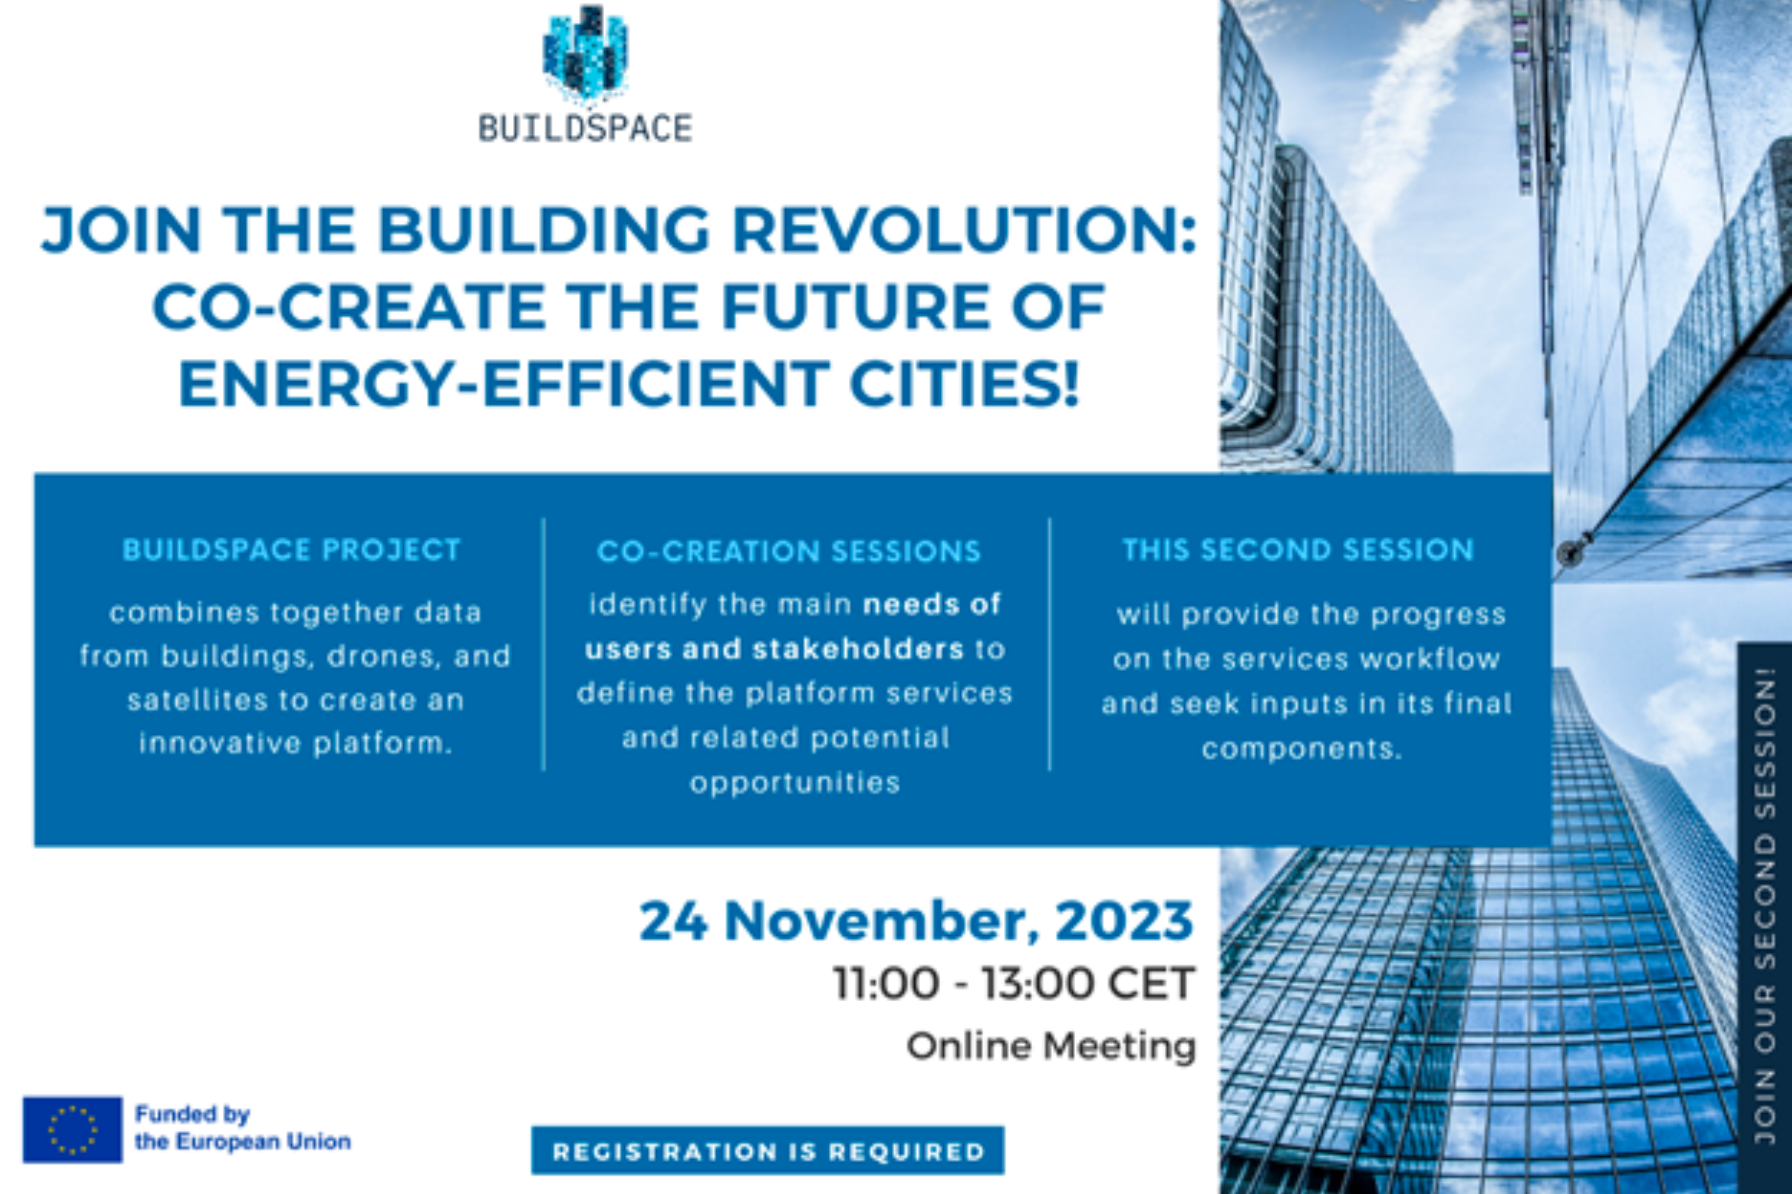 Join the building revolution: co-create the future of energy-efficient cities!